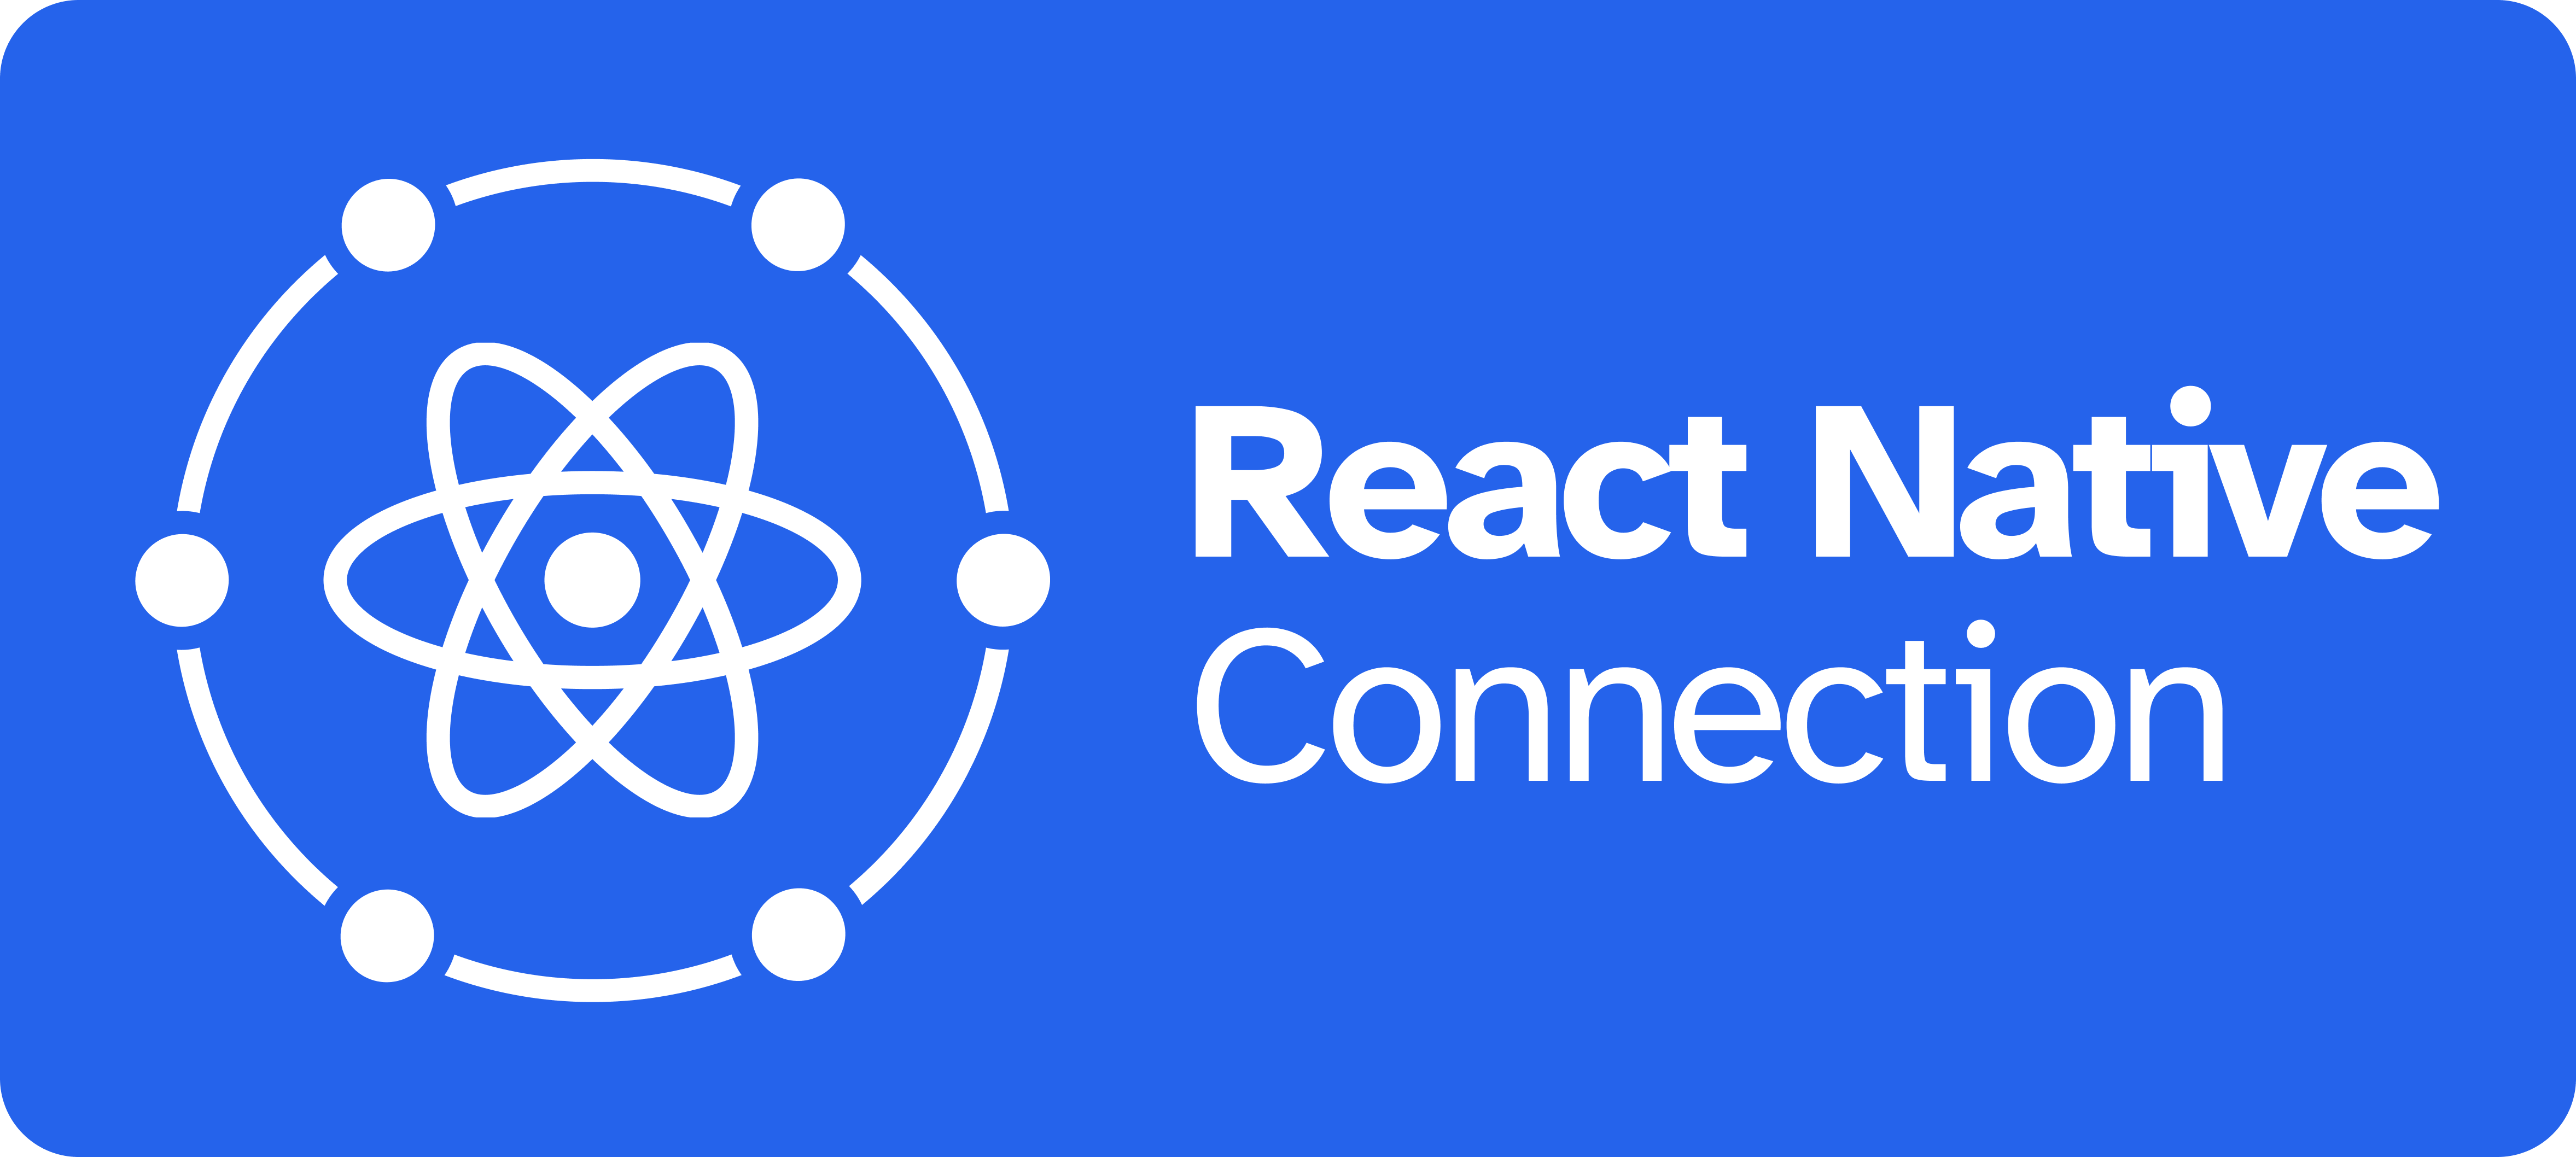 React Native Connection Conference